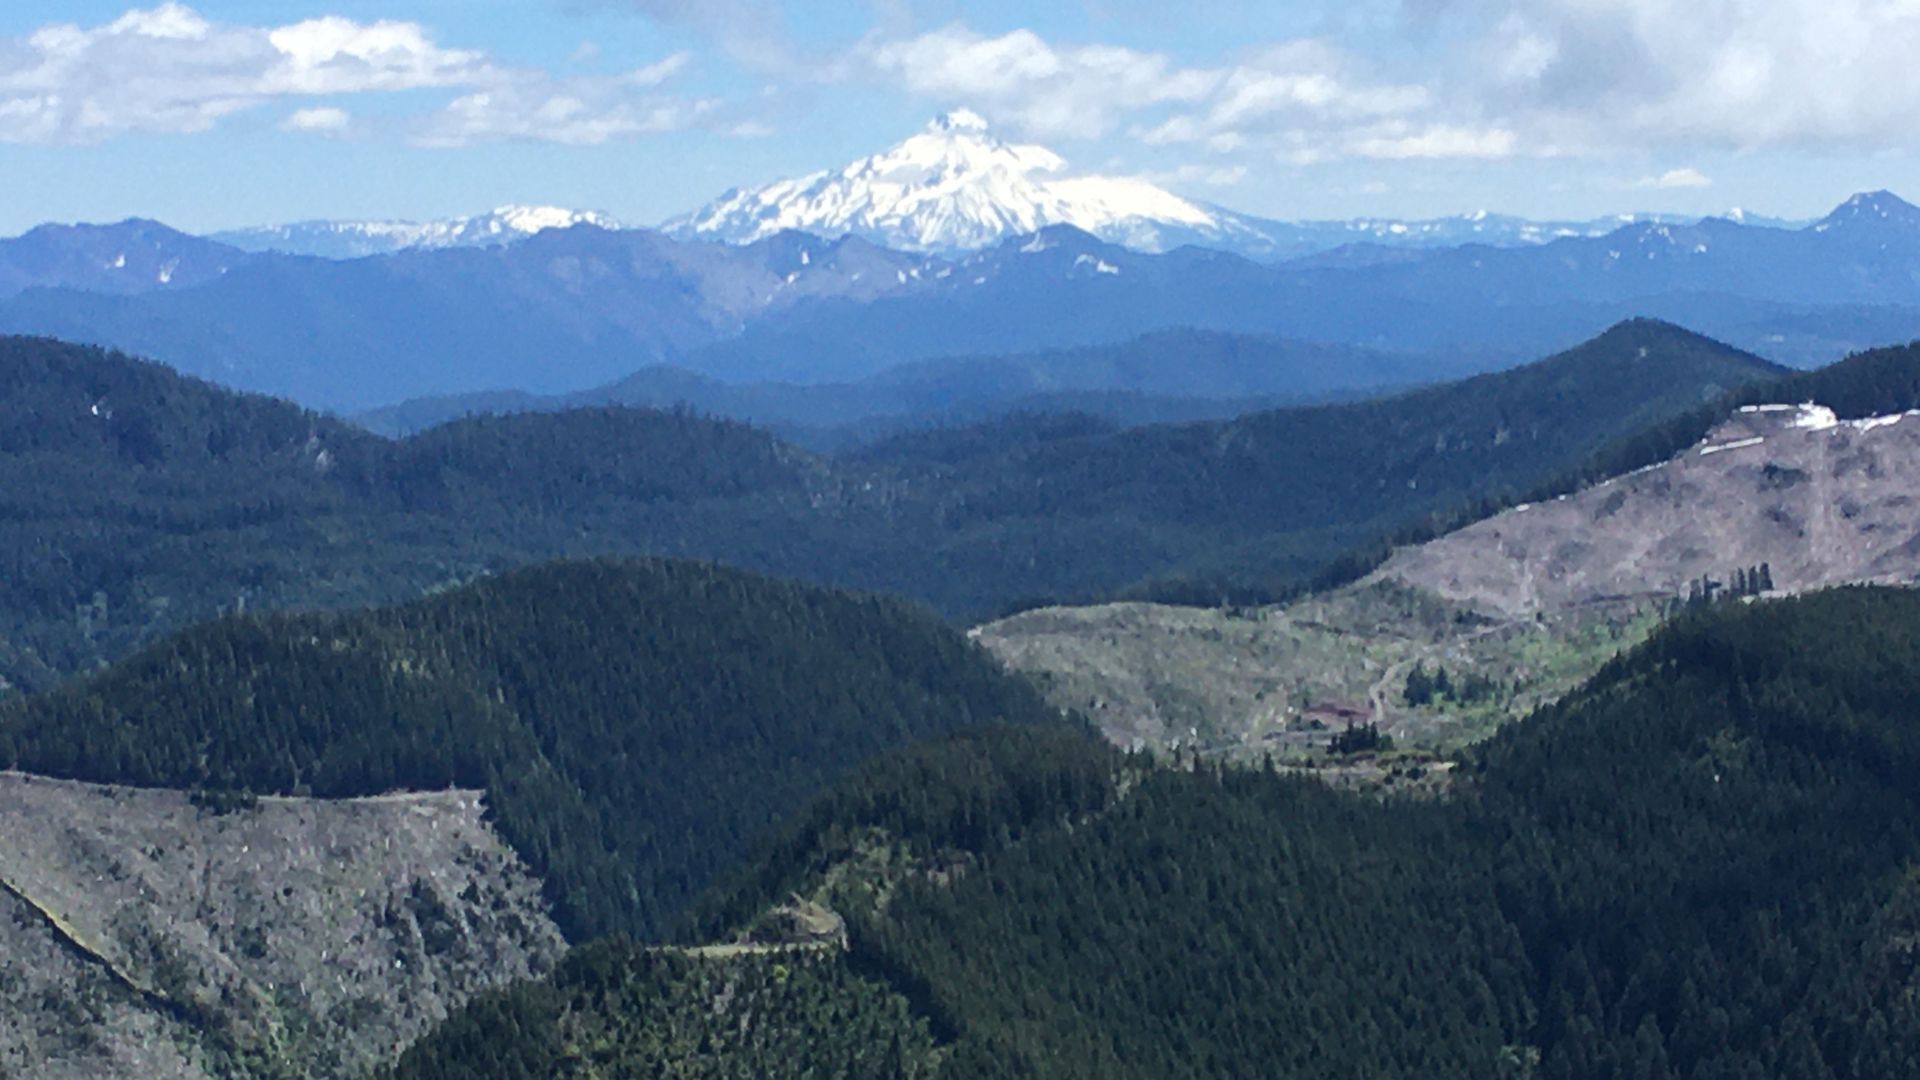 A conical snow-capped mountain with a mix of forest and clearcuts in the foreground.